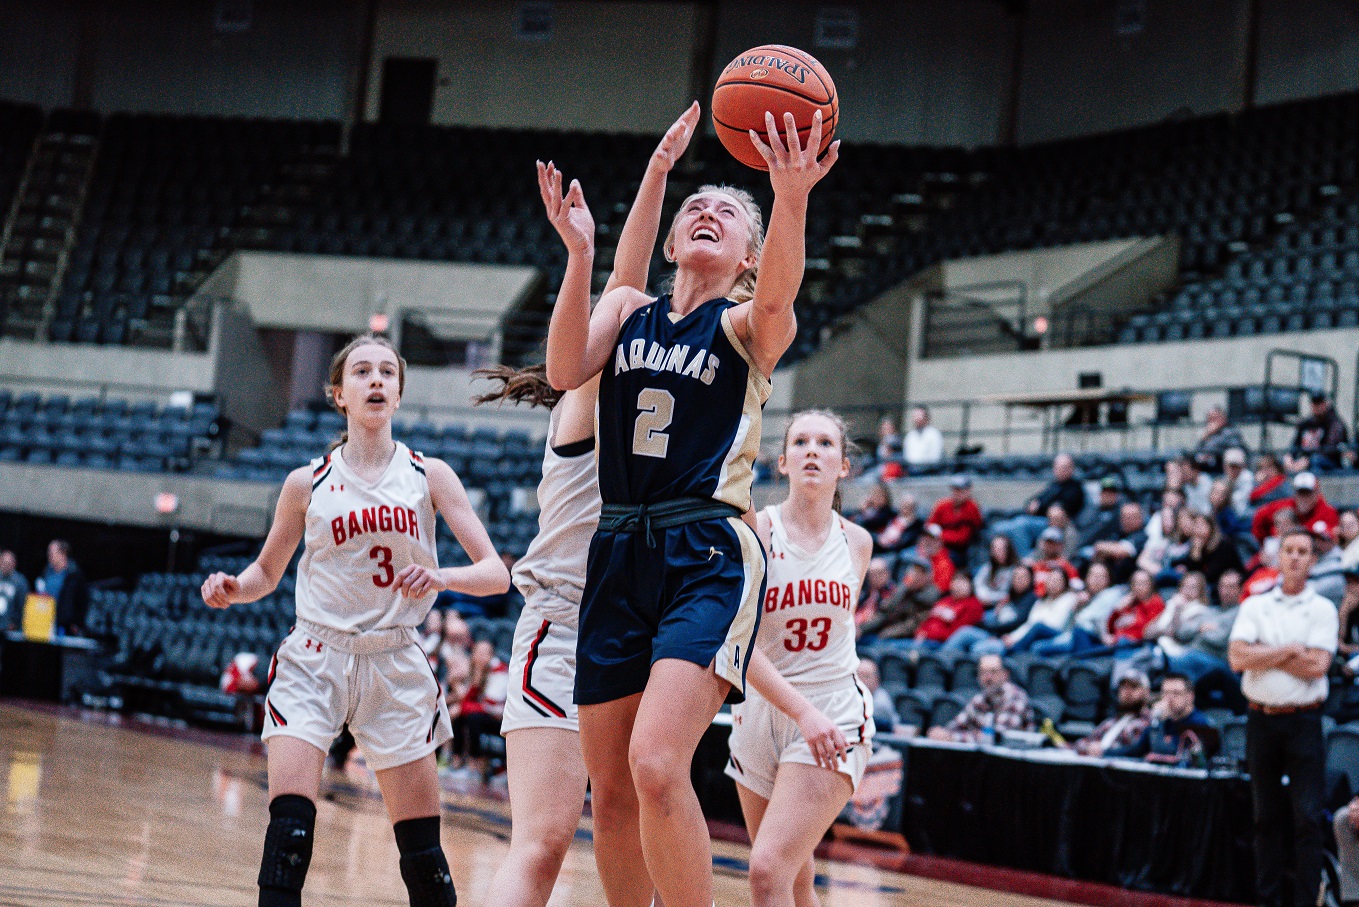 Aquinas guard Macy Donarski named first team all-state; six local players named honorable mention